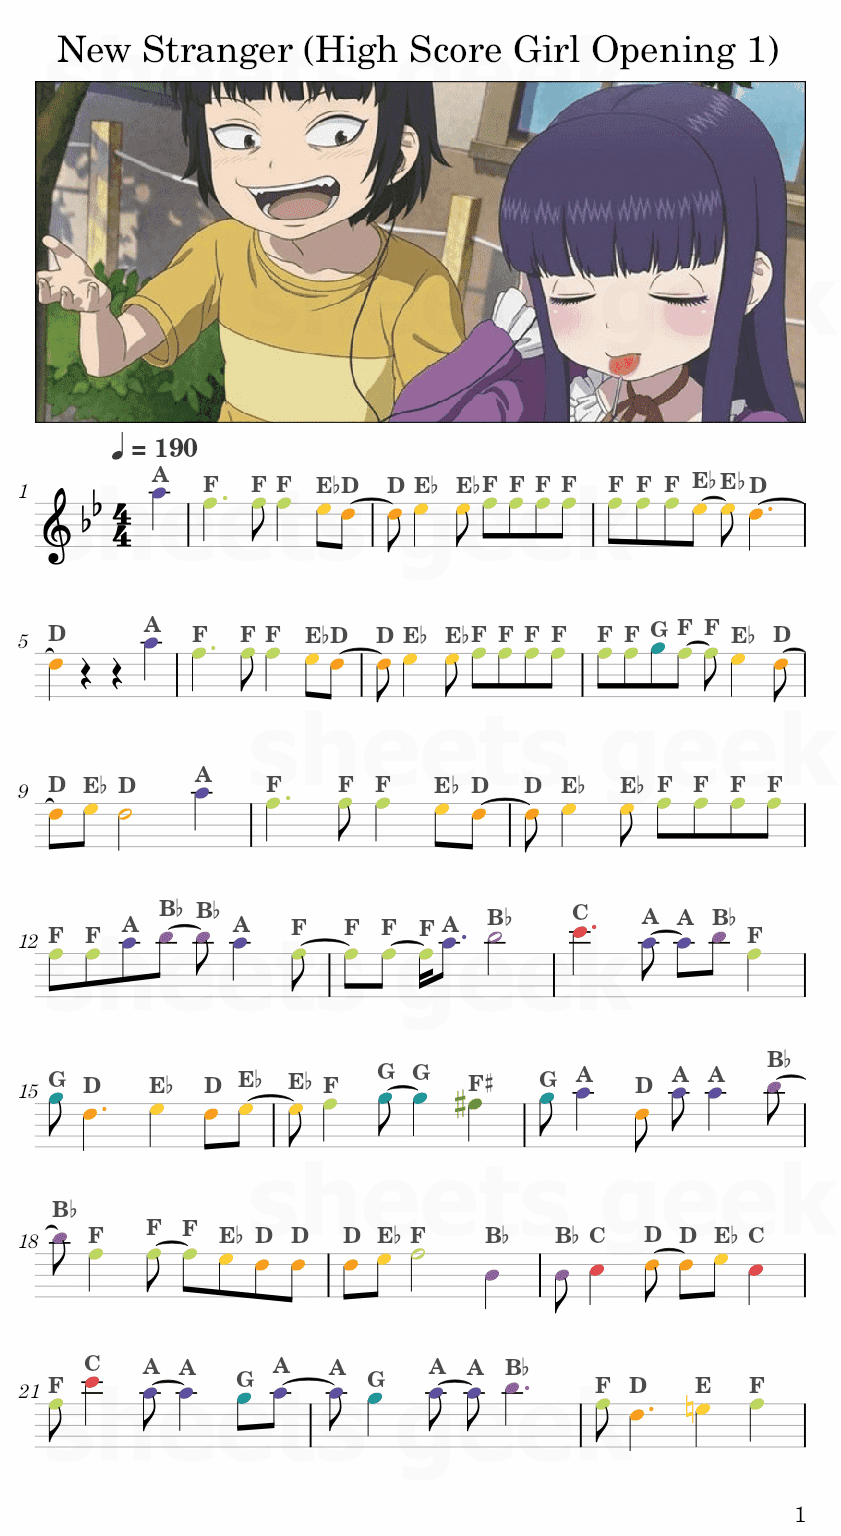 New Stranger by Sora Tob Sakana (High Score Girl Opening 1) Easy Sheet Music Free for piano, keyboard, flute, violin, sax, cello page 1